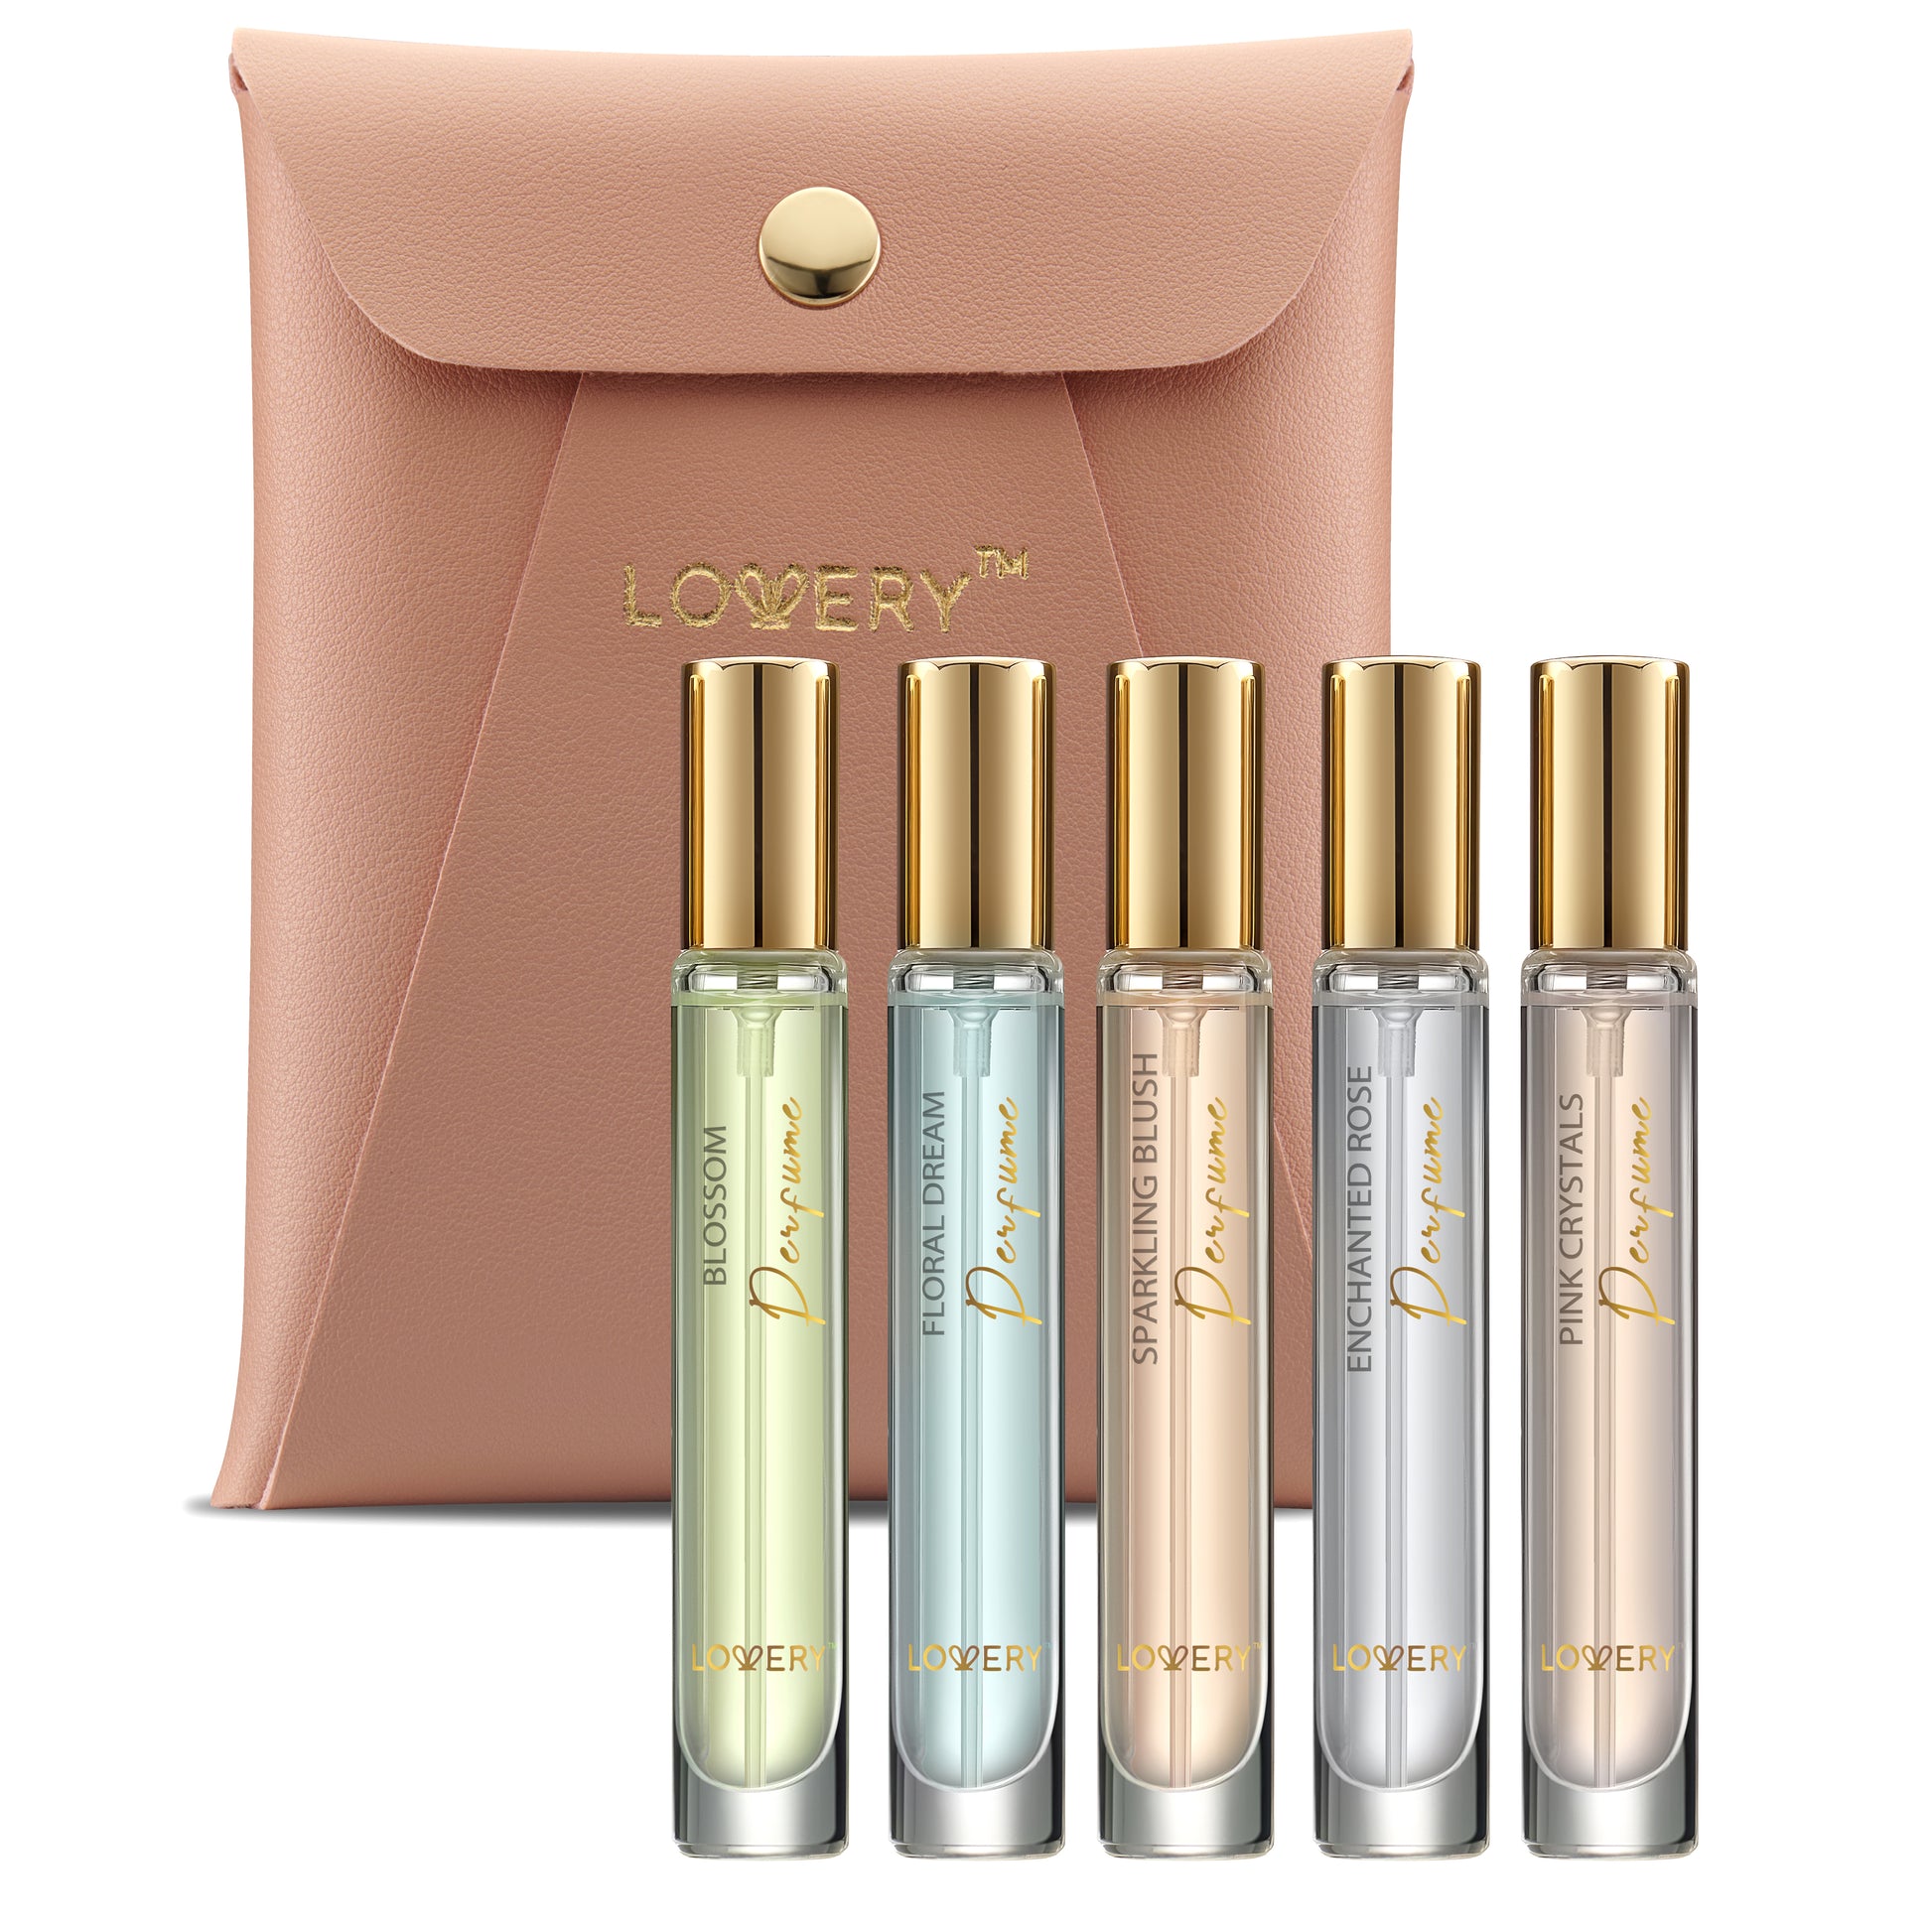 10 Mother's Day Fragrance Gift Sets • Scent Lodge